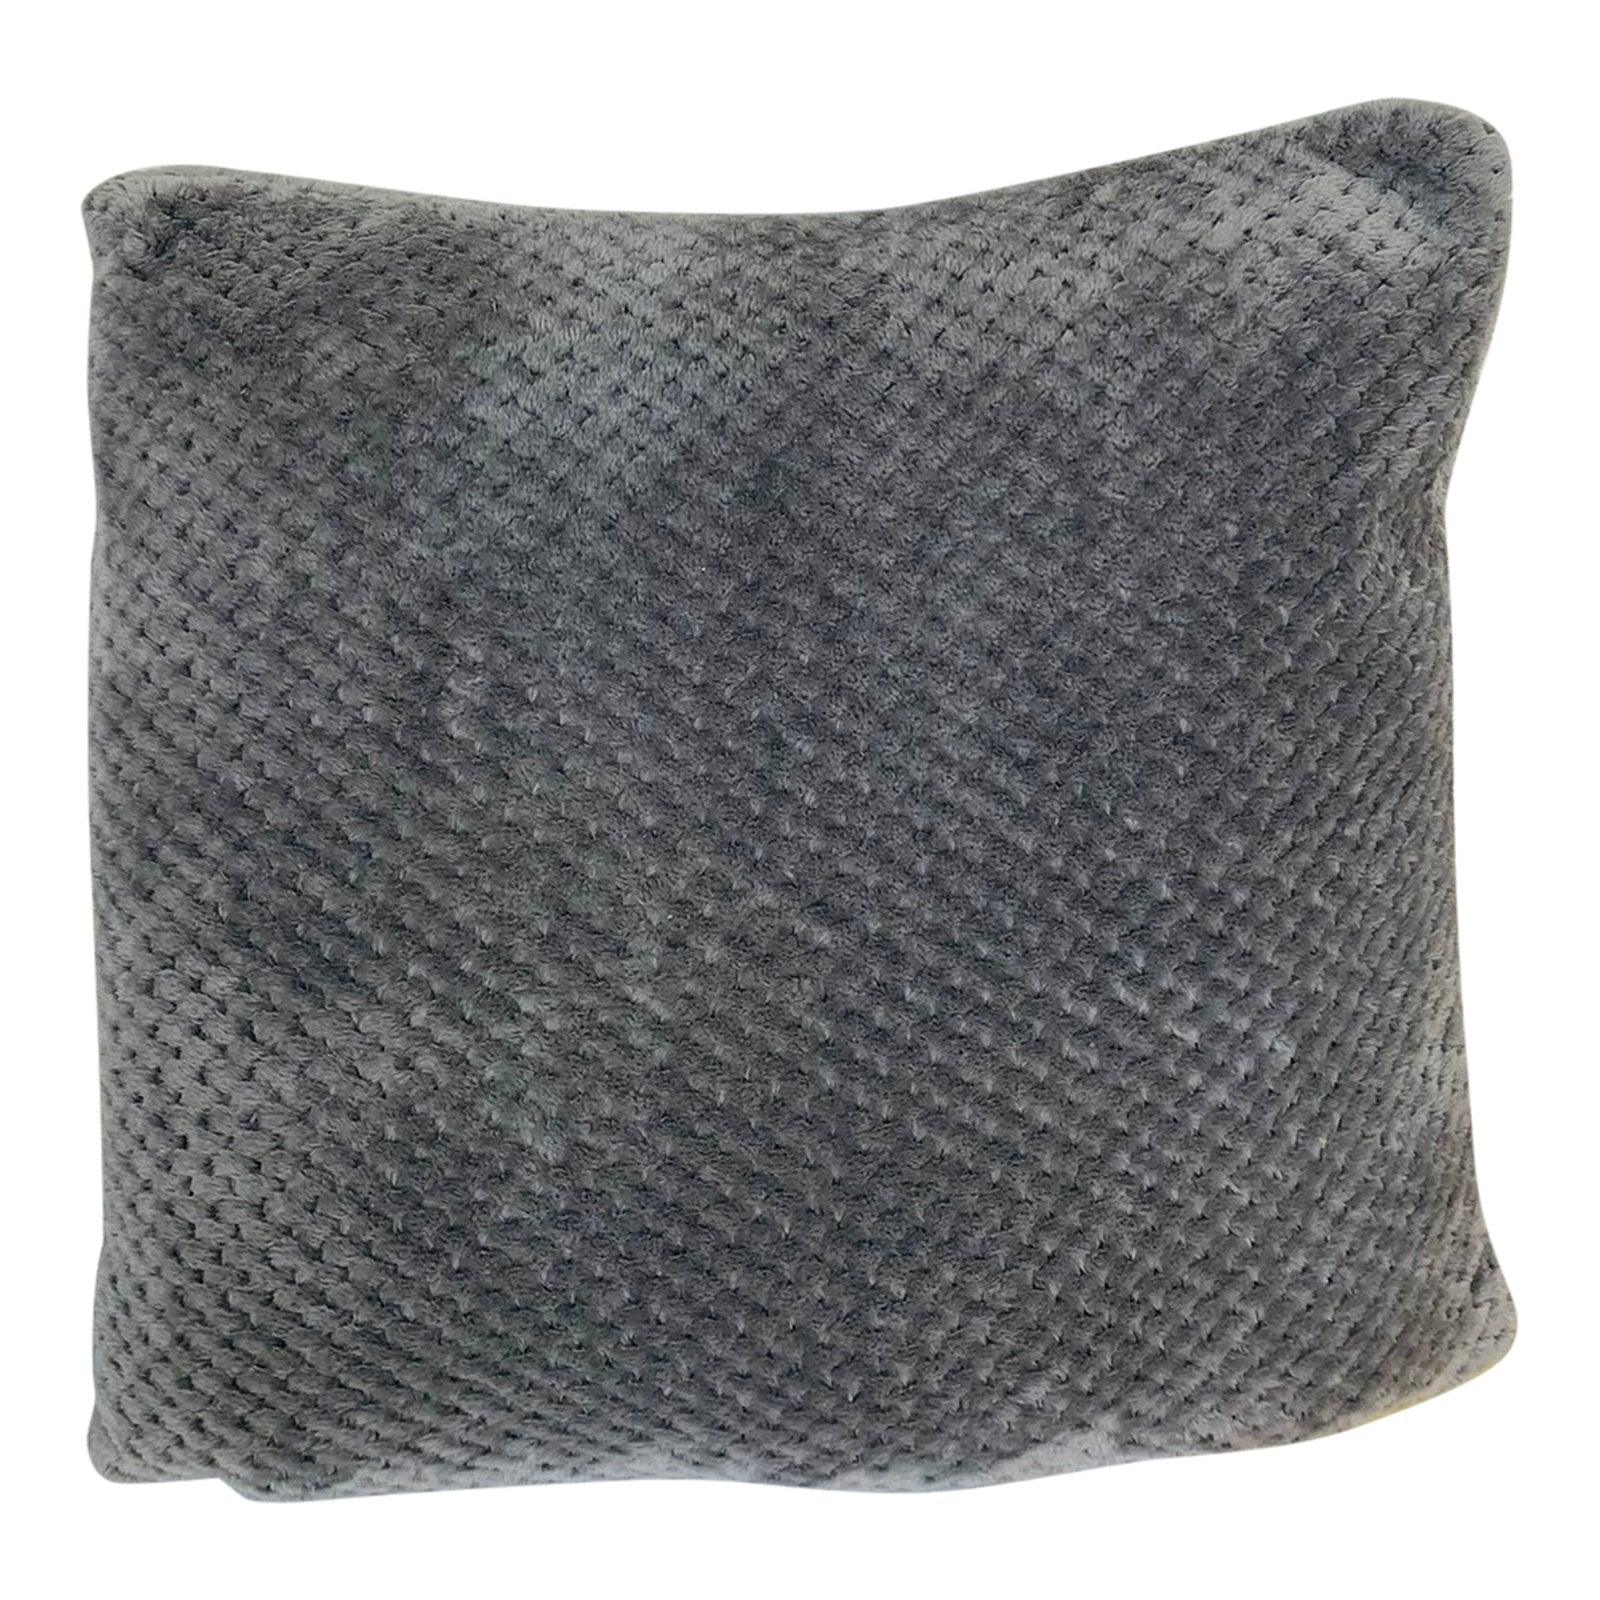 View Textured Scatter Cushion Grey 45cm information